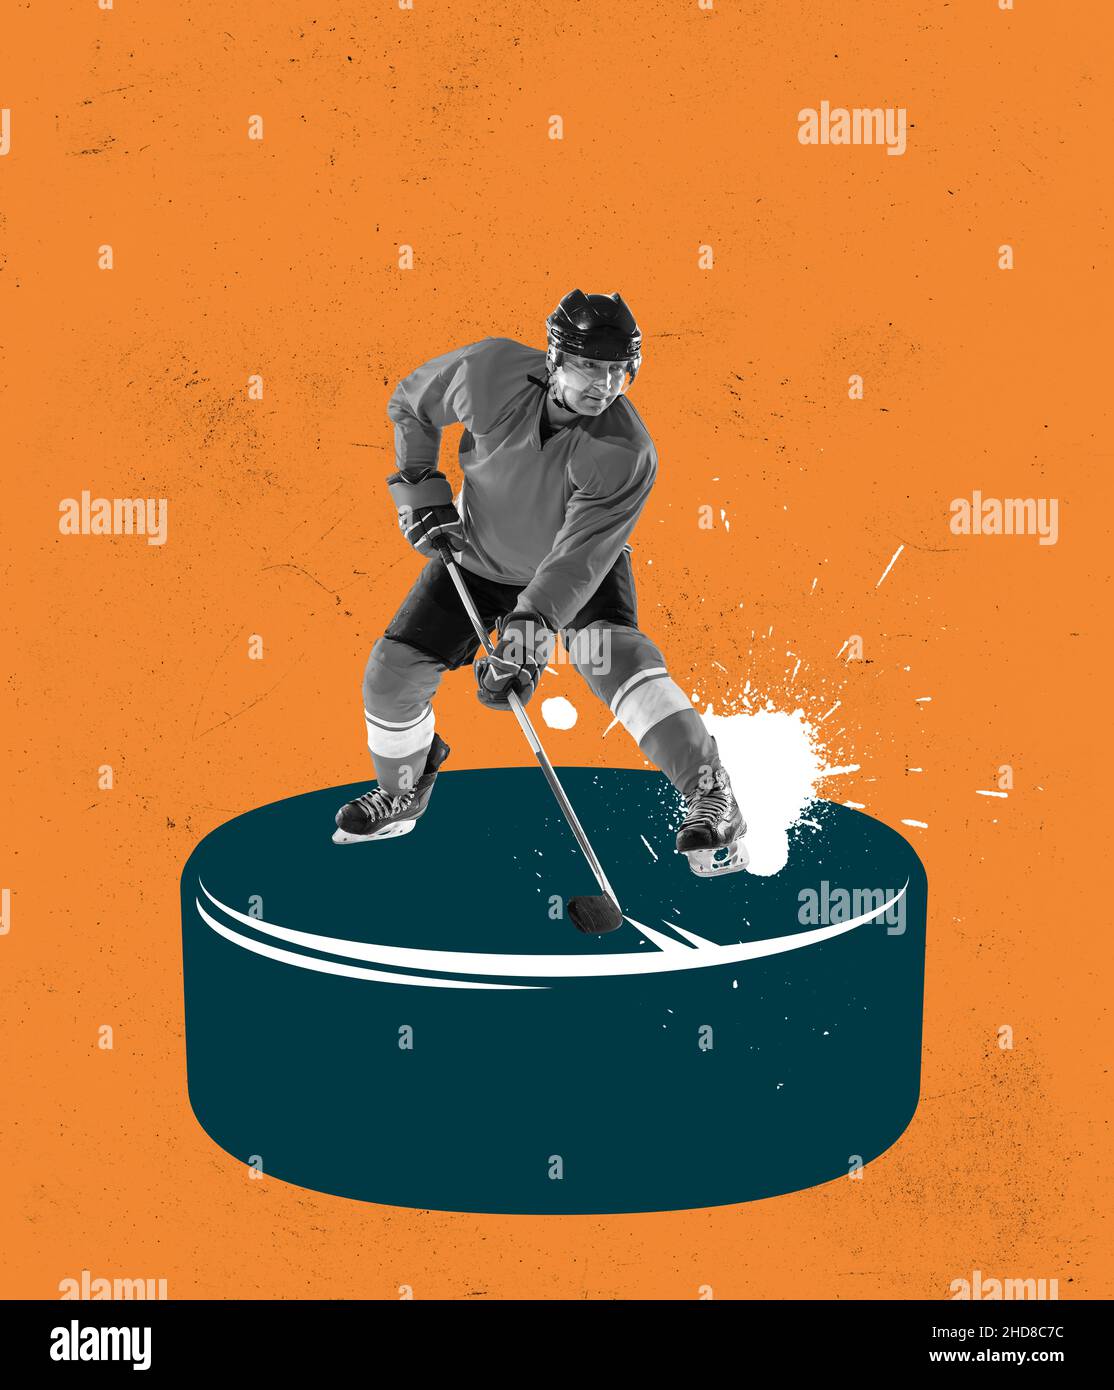 1,119 Hockey Player Standing Images, Stock Photos, 3D objects, & Vectors